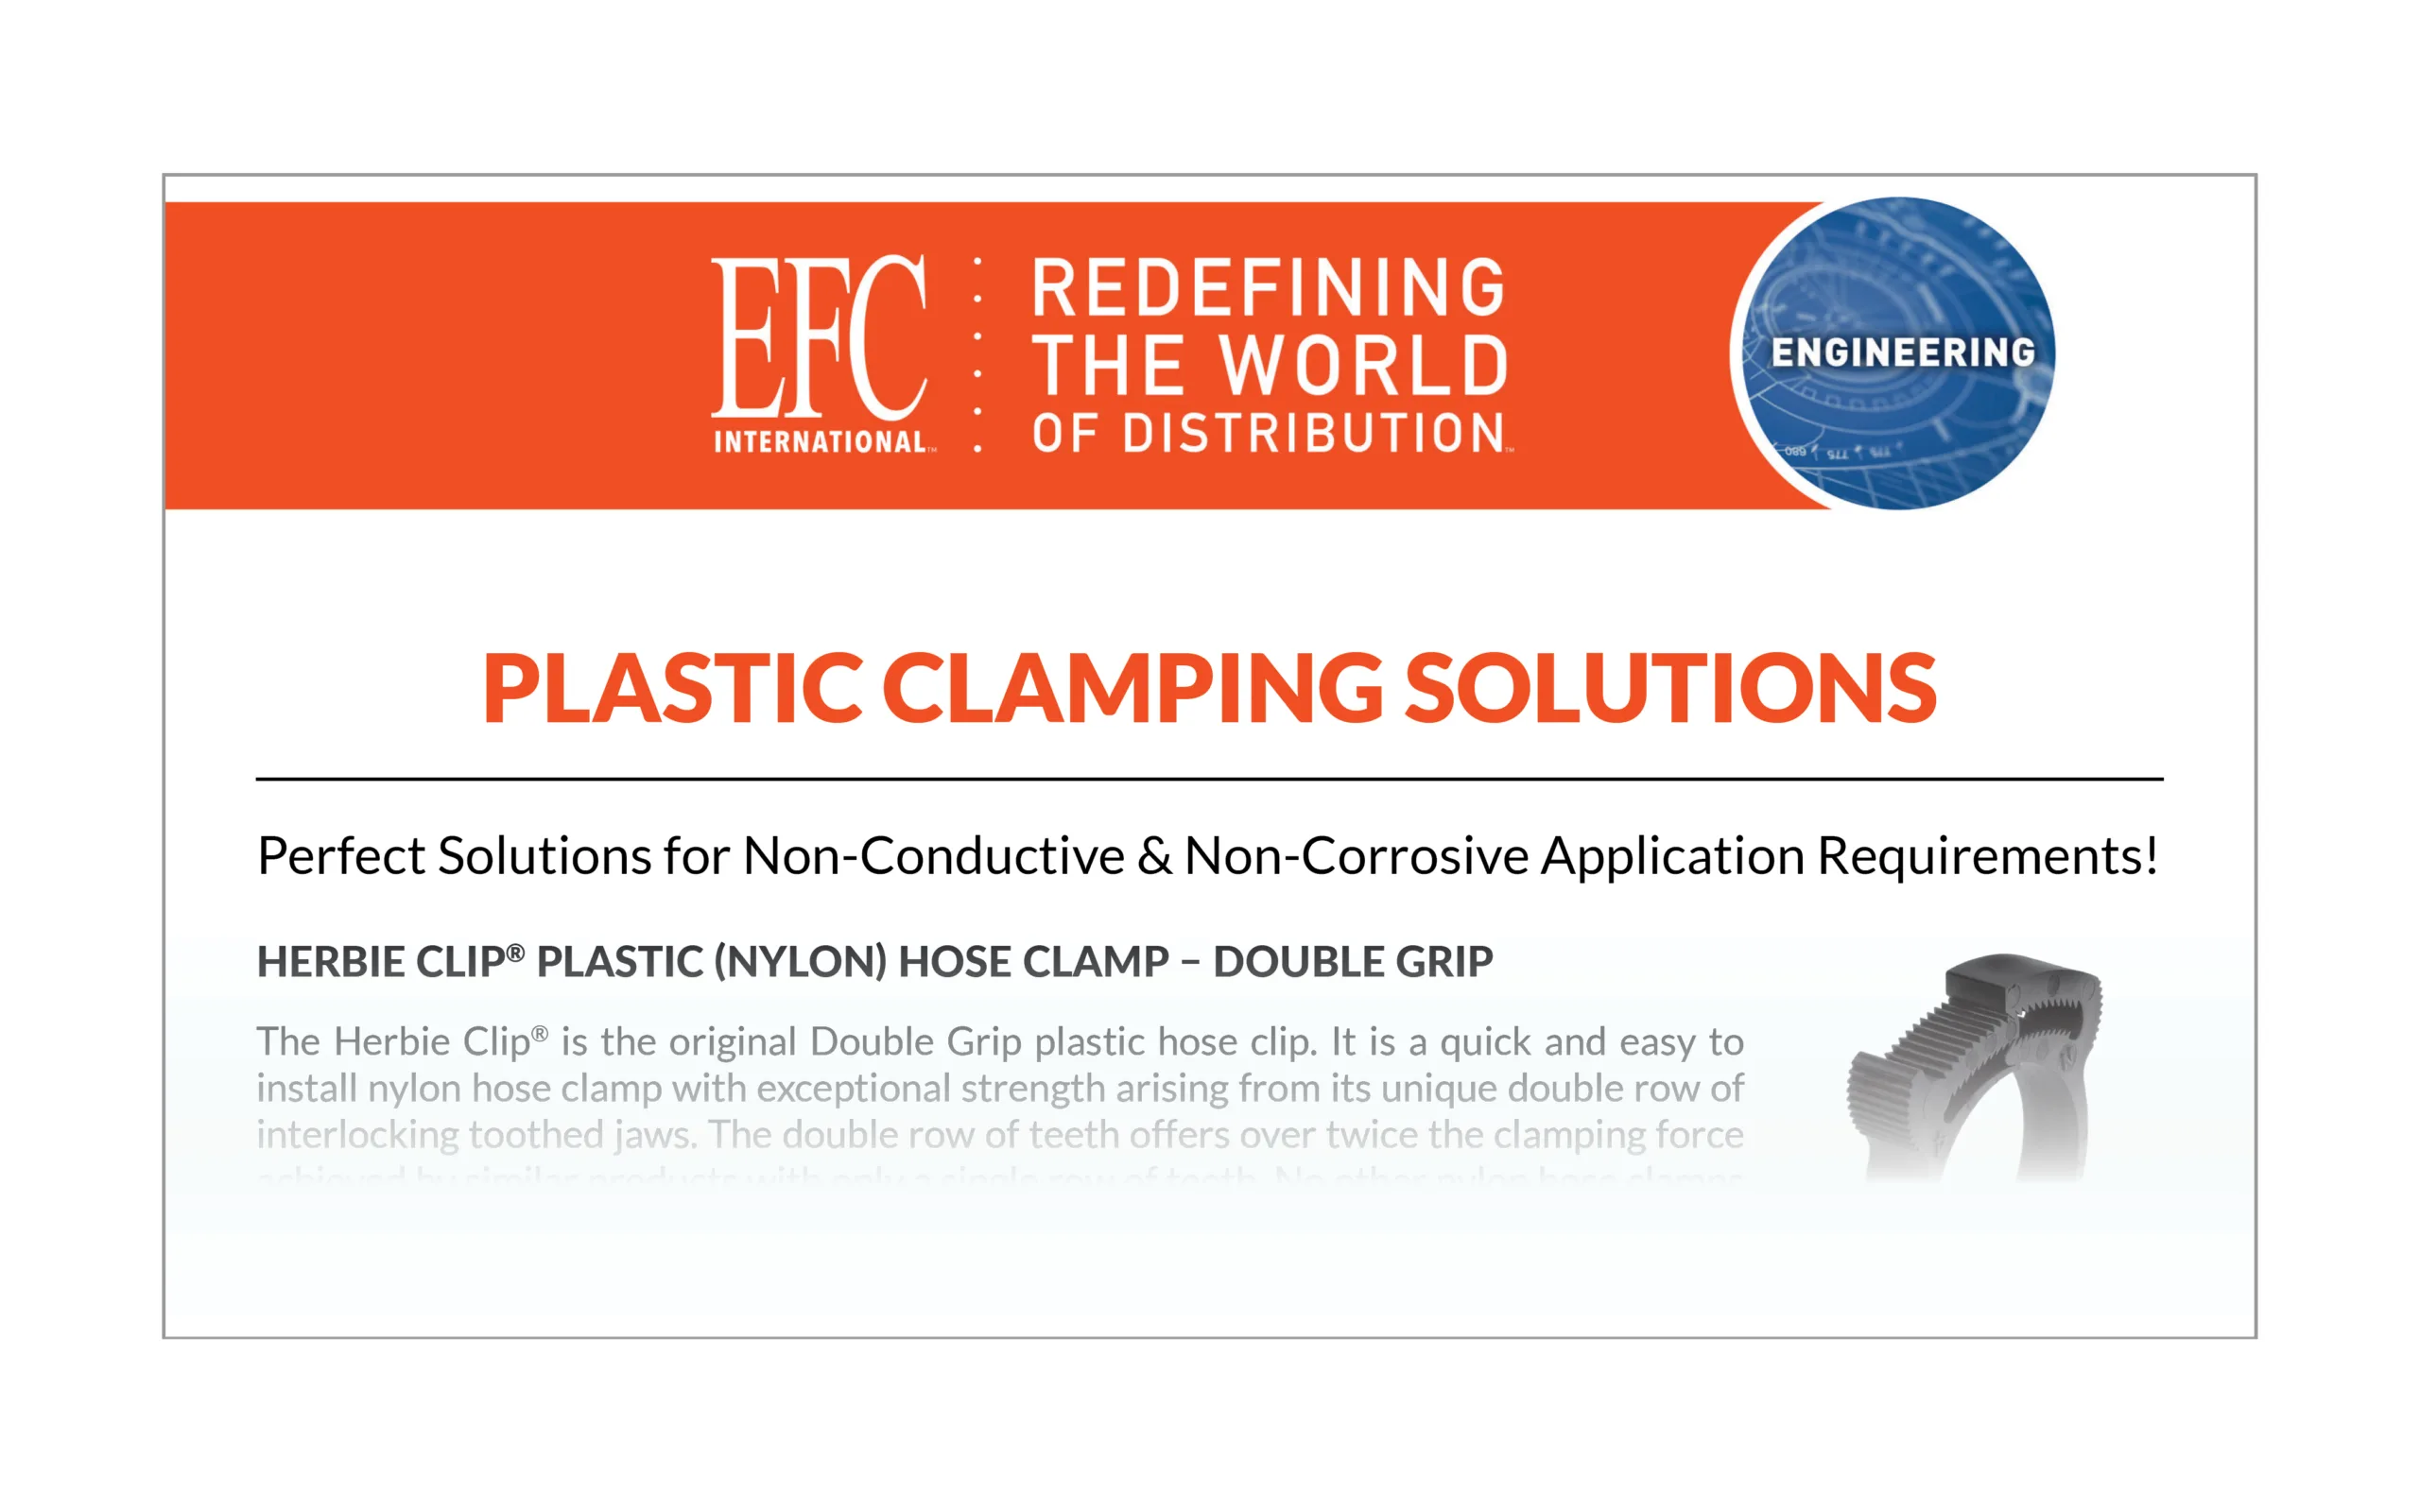 Plastic Clamping Solutions